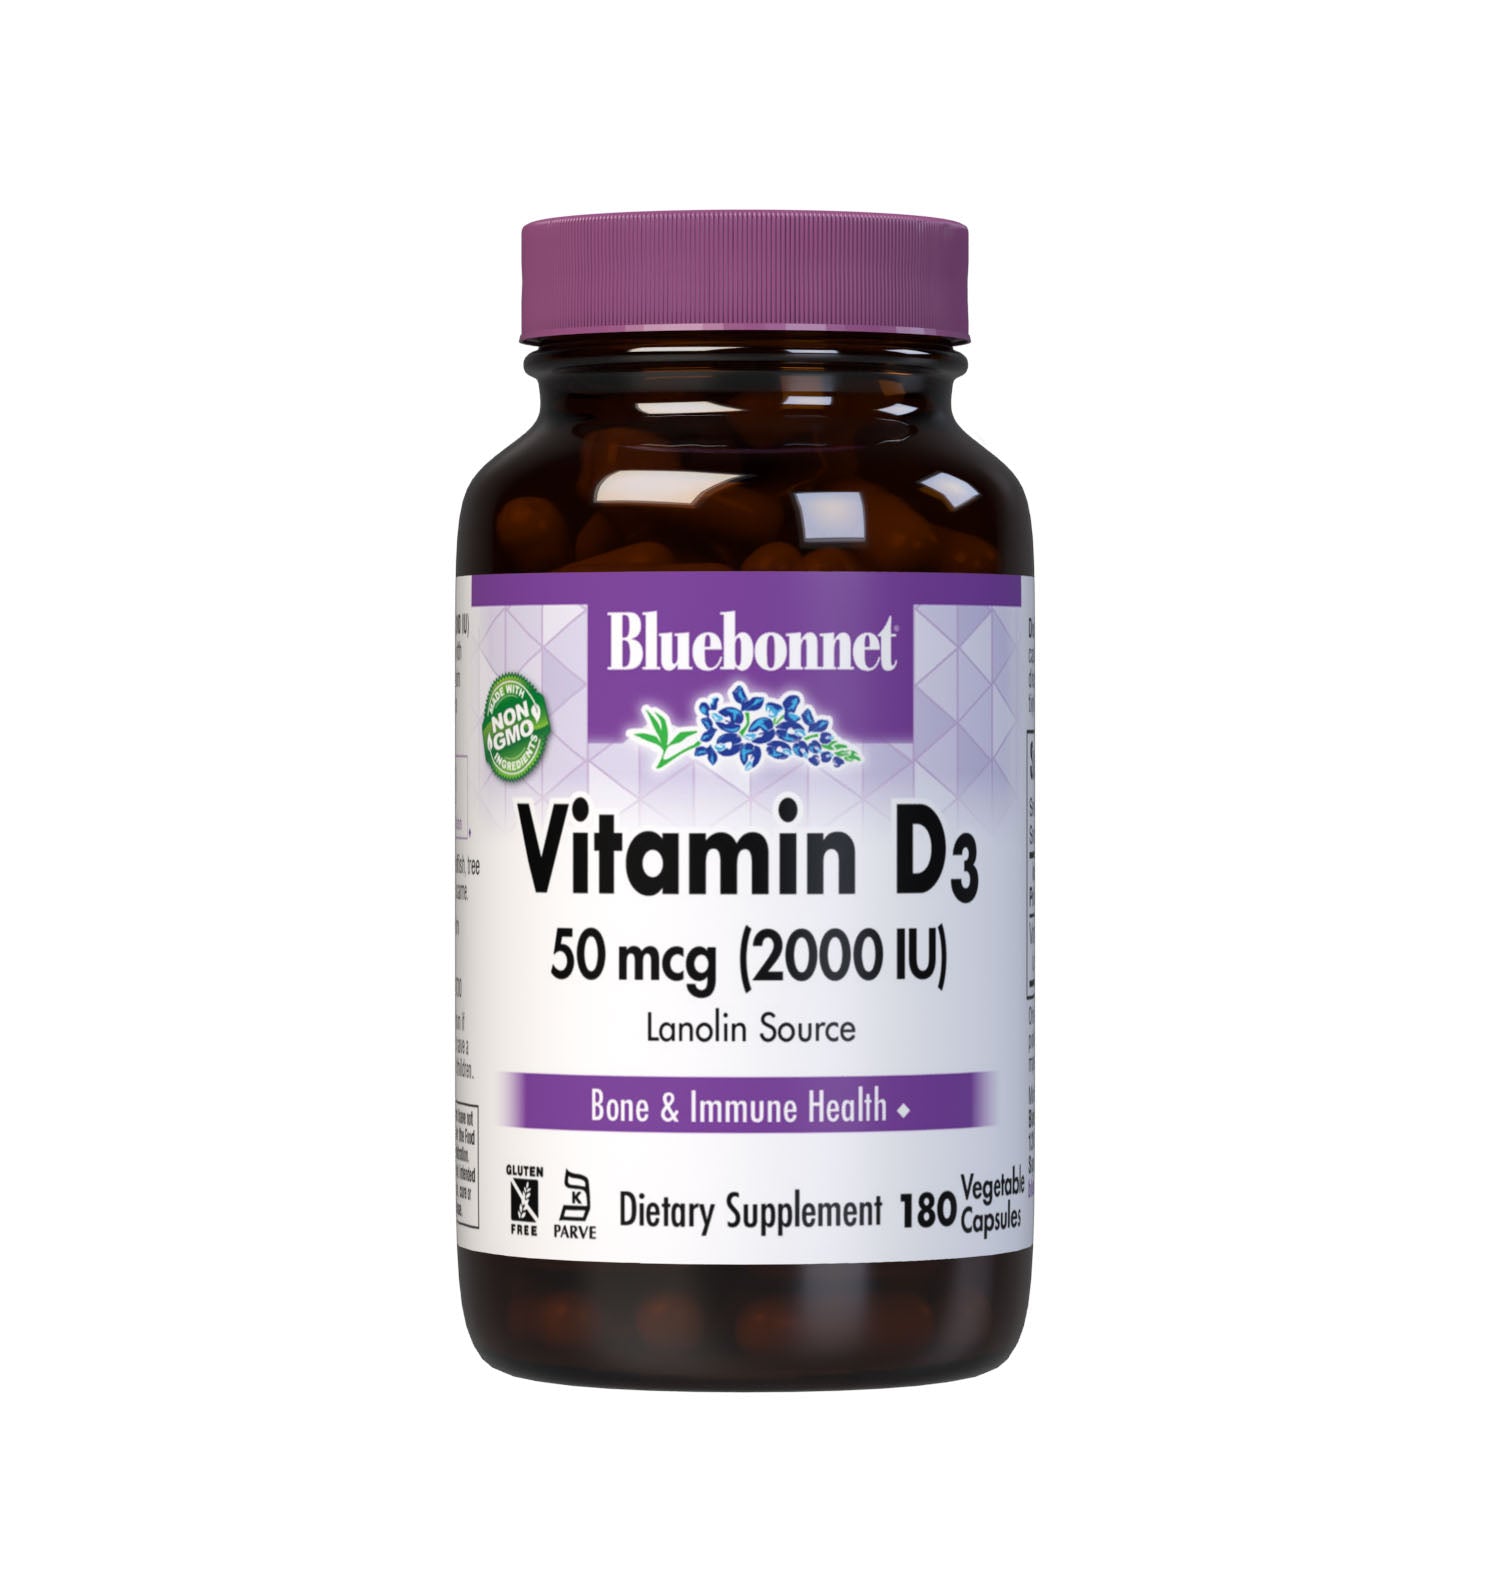 Bluebonnet’s Vitamin D3 2000 IU (50 mcg) Vegetable Capsules are formulated with vitamin D3 (cholecalciferol) from lanolin that supports strong healthy bones and immune function. #size_180 count